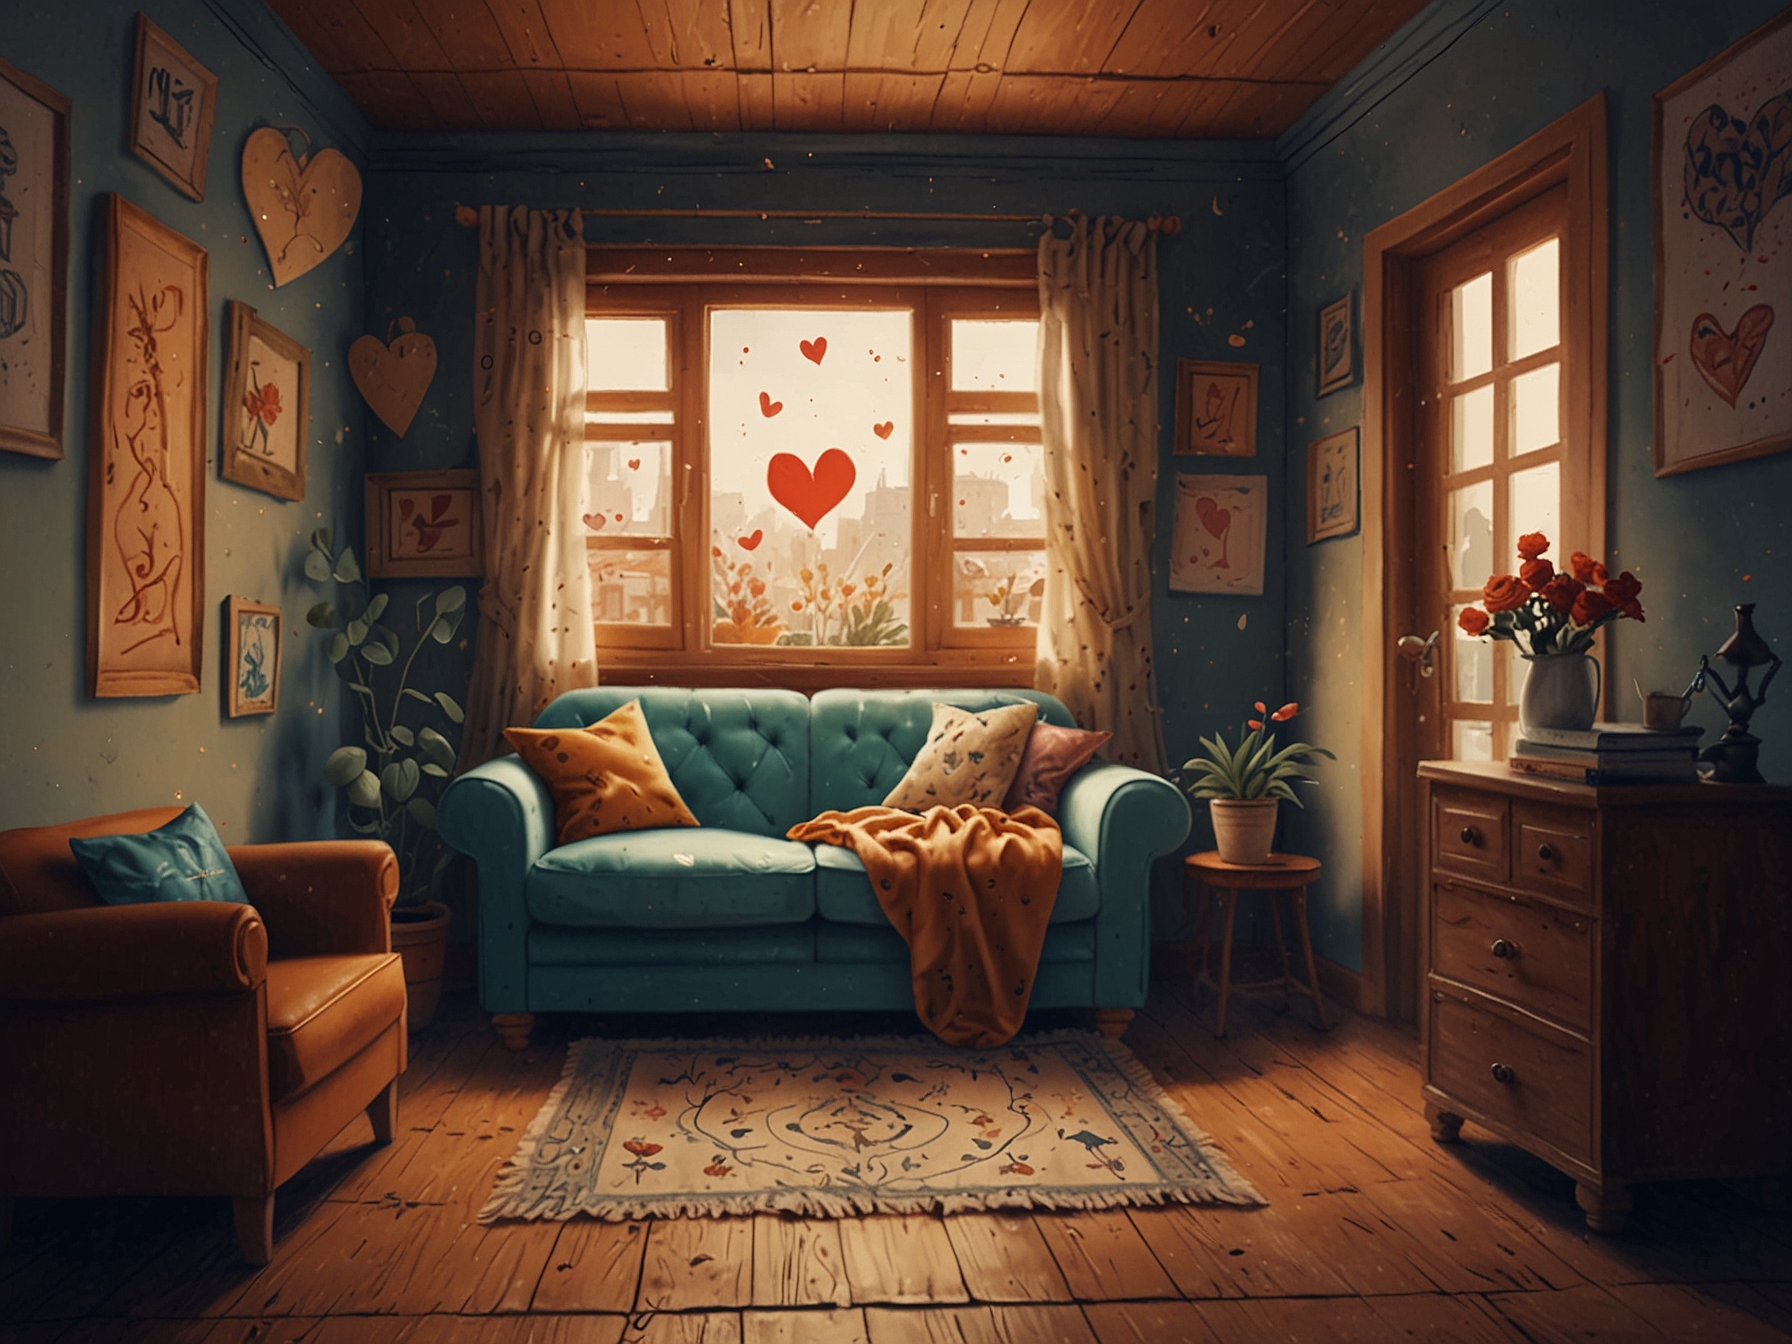 A Cancer zodiac sign surrounded by illustrations of hearts and a cozy home, symbolizing nurturing and comfort.